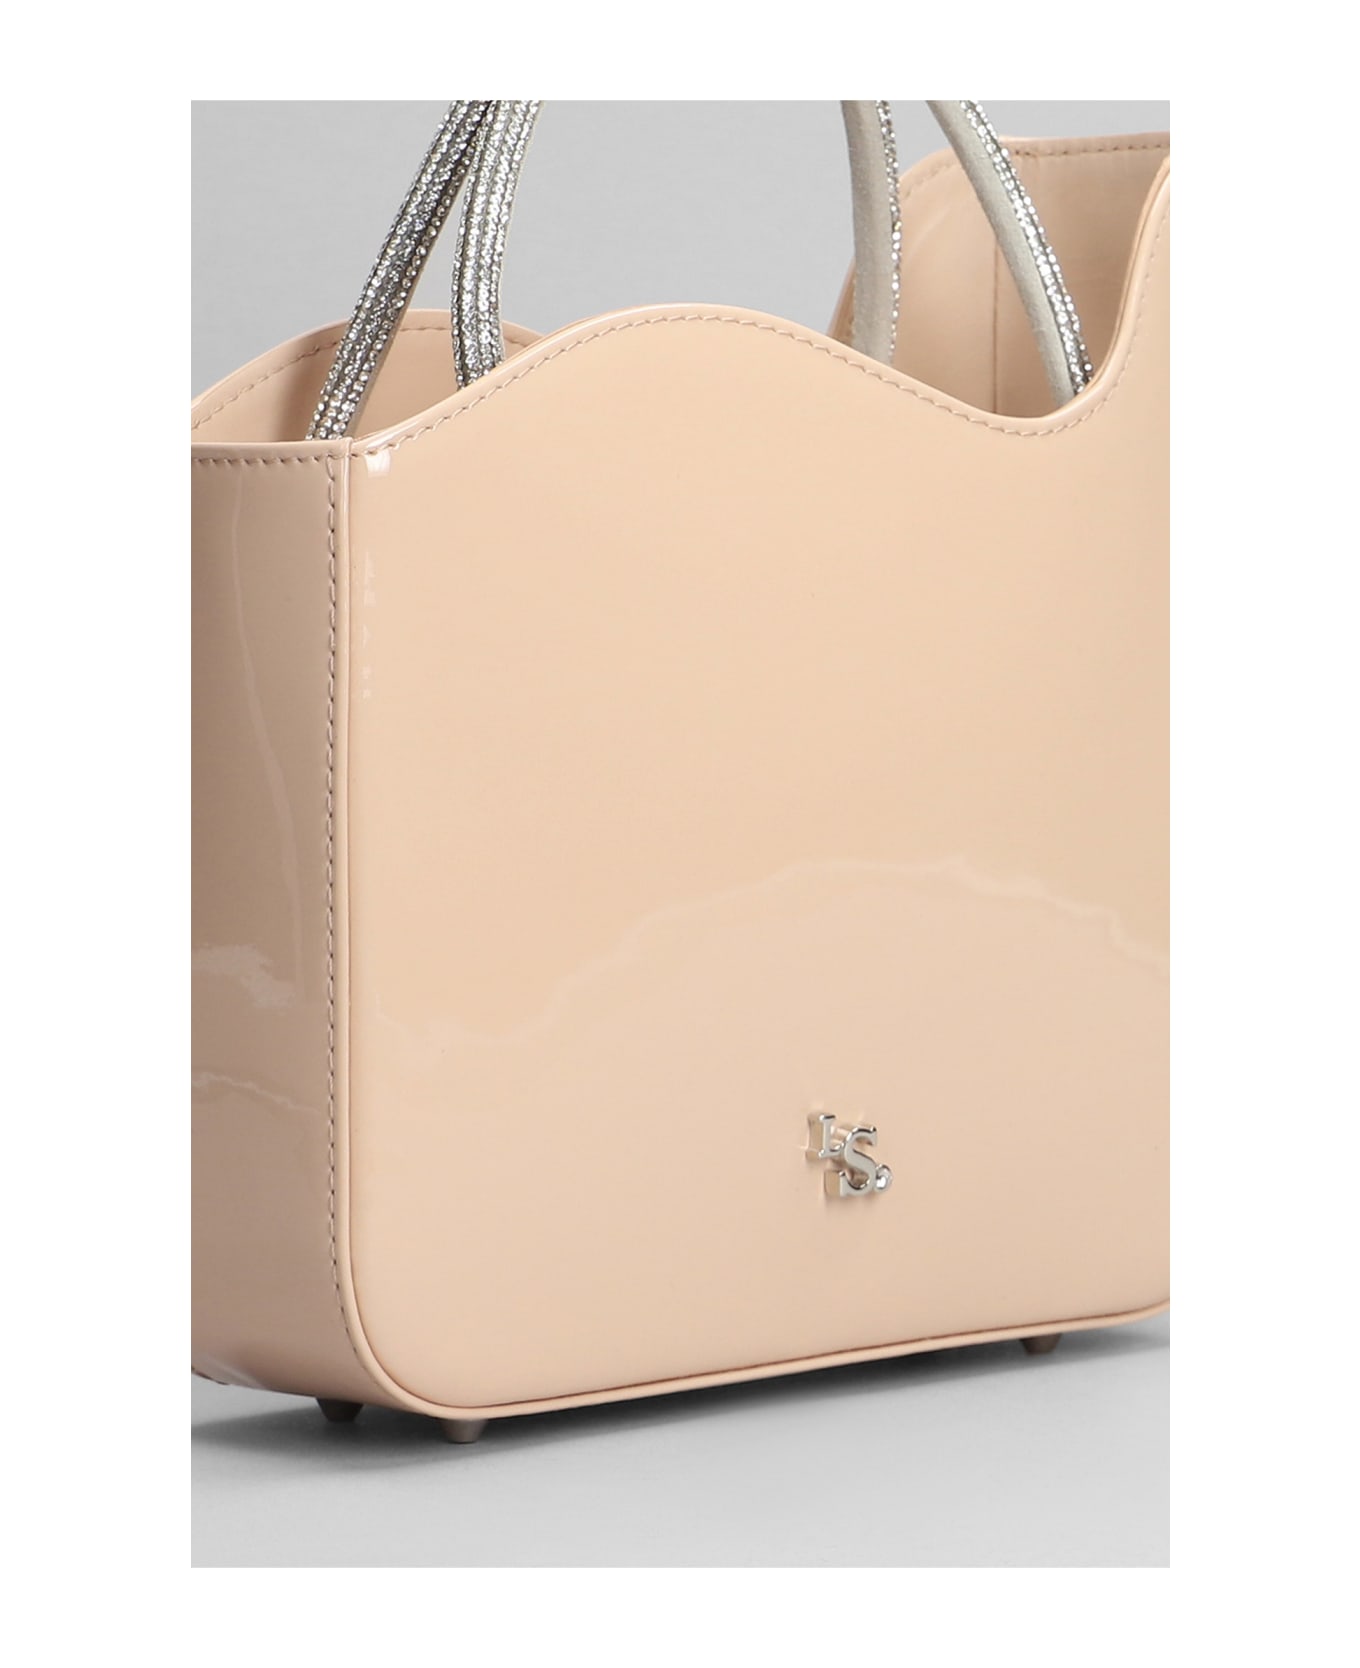 Le Silla Ivy Shoulder Bag In Powder Patent Leather - powder トートバッグ